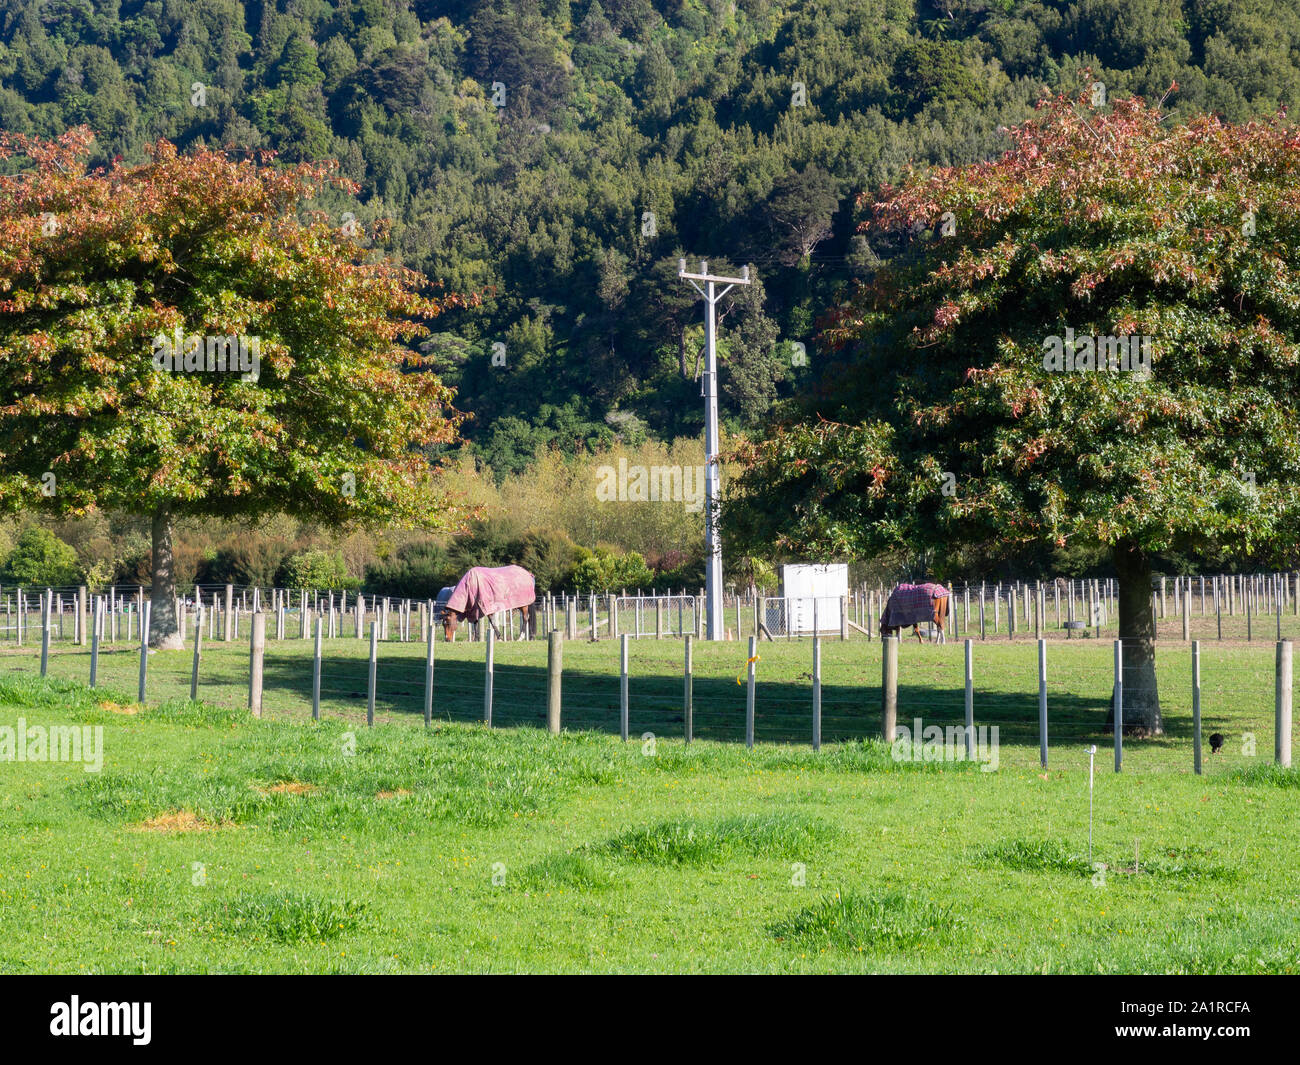 Horses Grazing In A Green Paddock Stock Photo